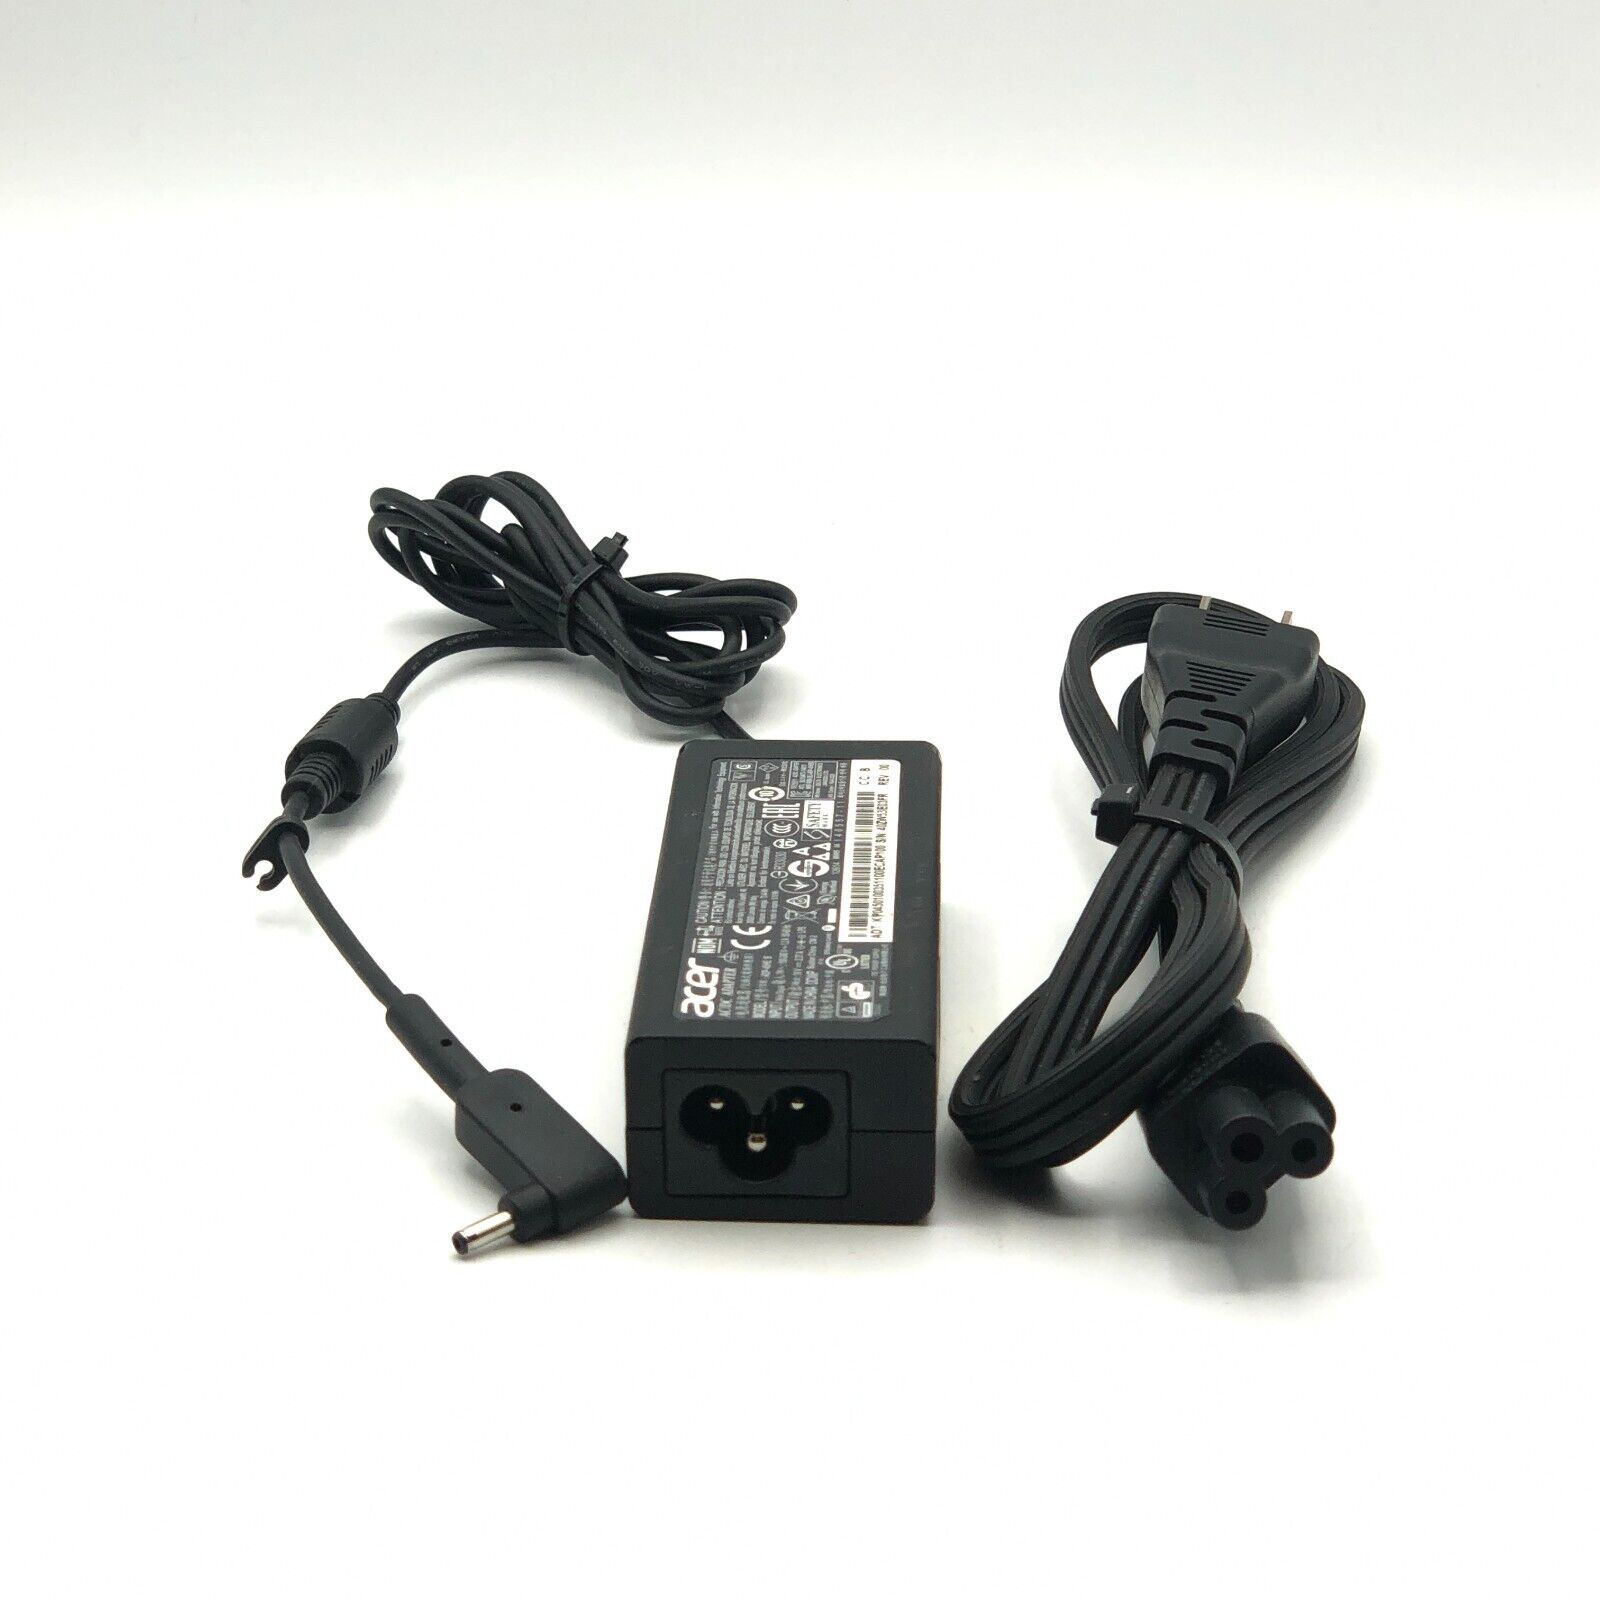 Genuine Acer AC Adapter Charger for Acer Aspire AO1-131-C9RK AO1-431-C1FZ w/Cord